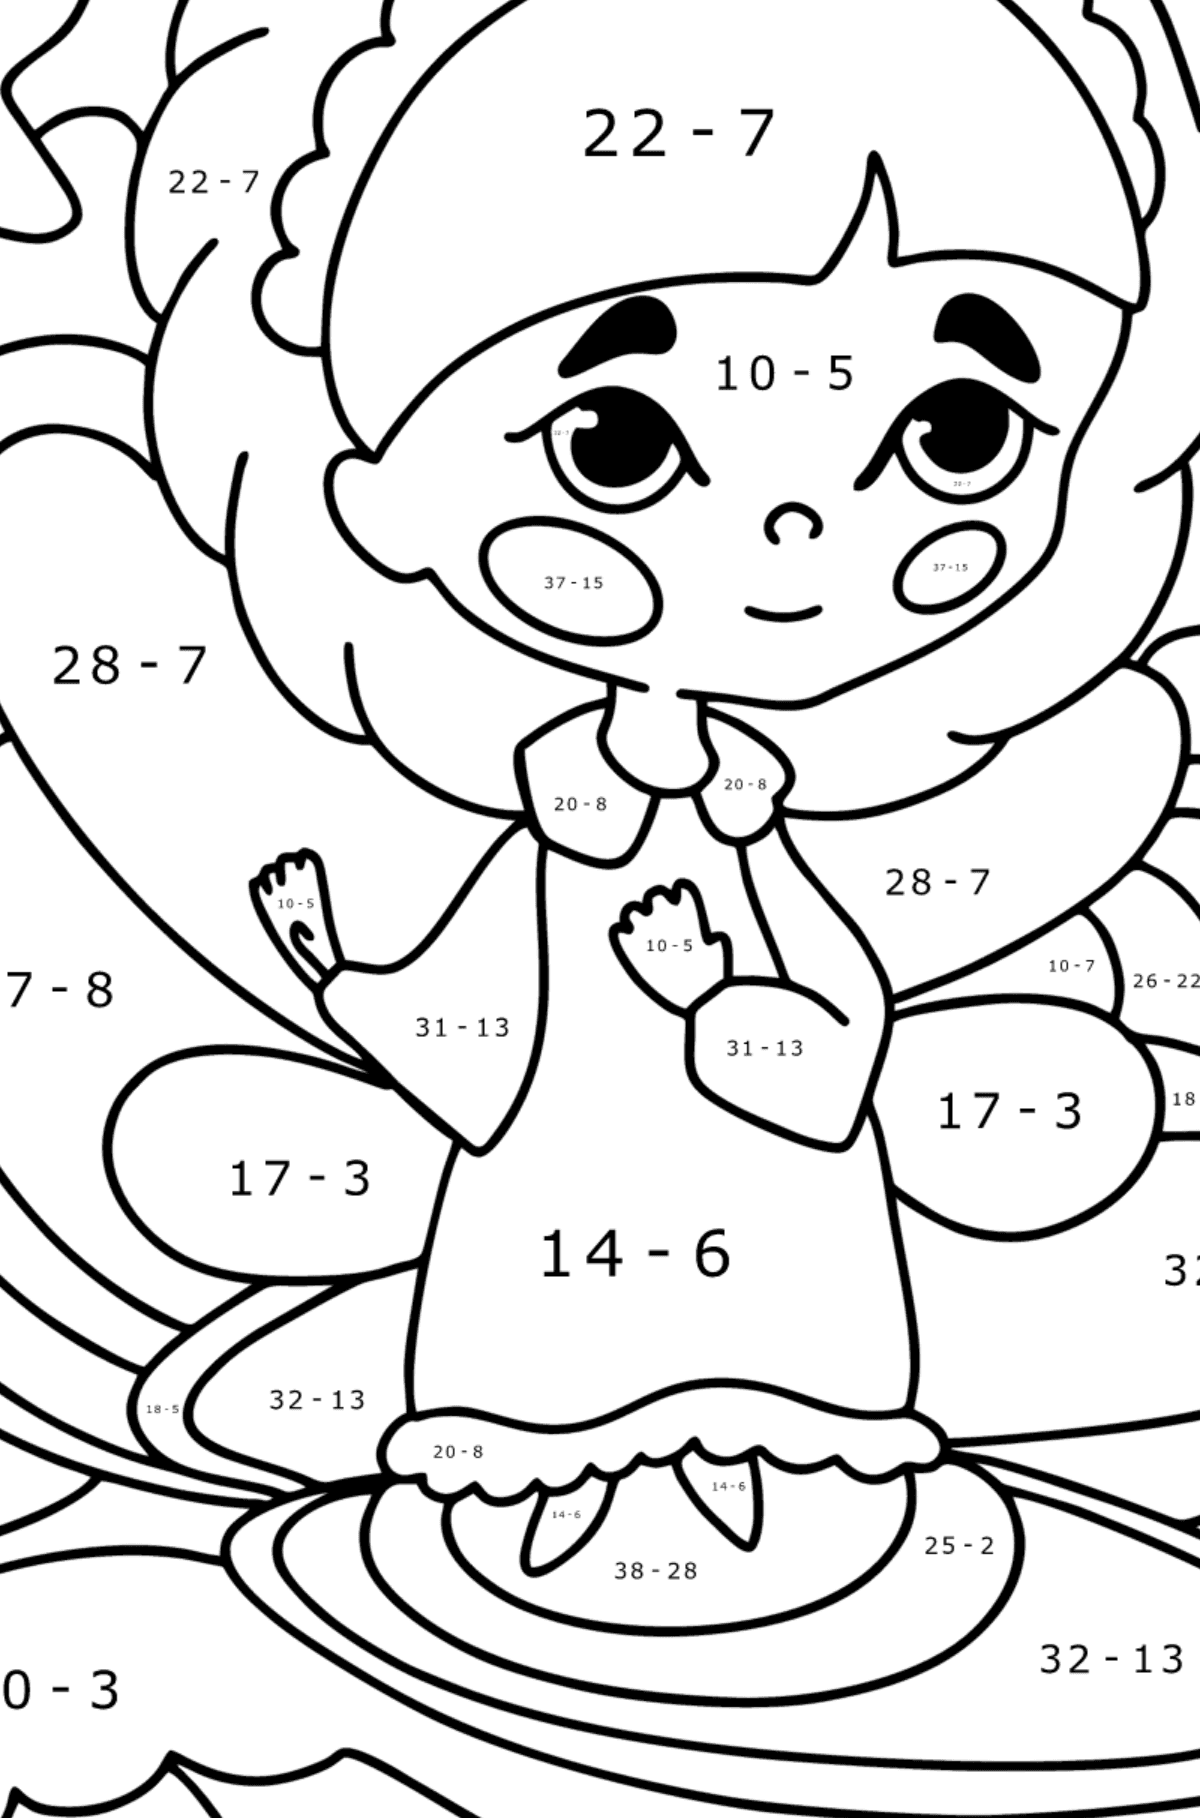 Sea Fairy coloring page - Math Coloring - Subtraction for Kids